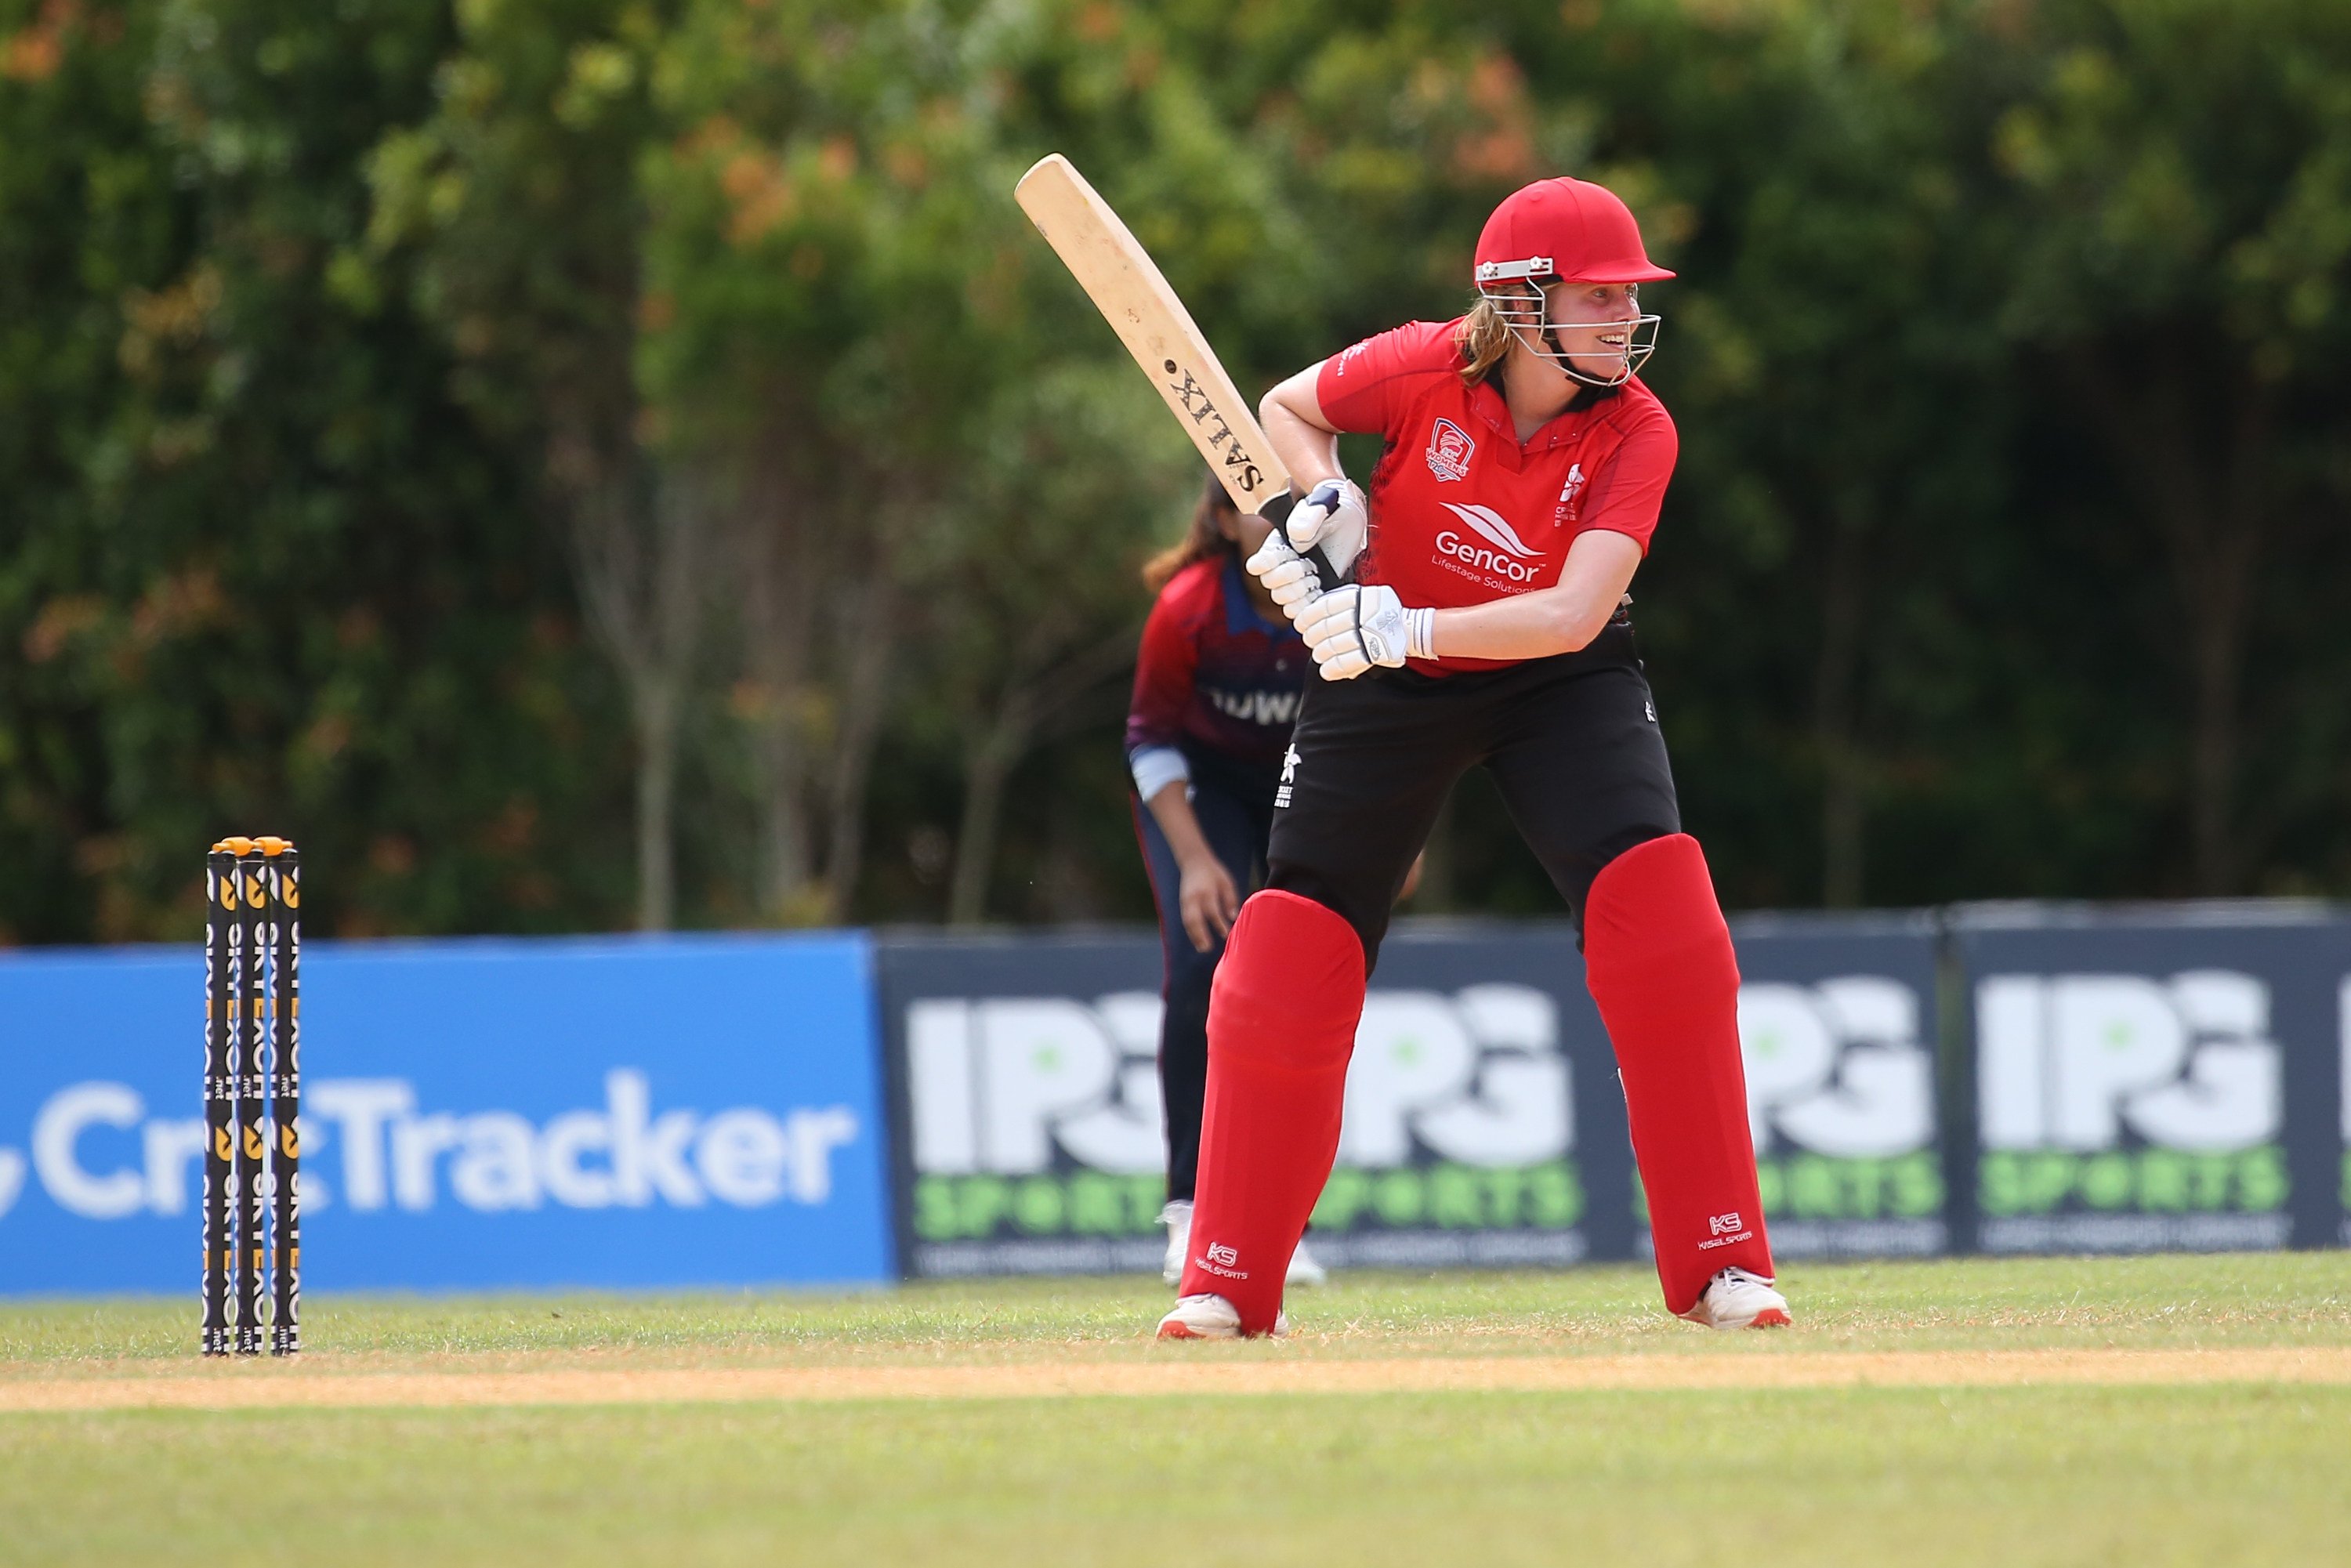 Elysa Hubbard put a solid 13 runs on the board for Hong Kong against Kuwait. Photo: ACC